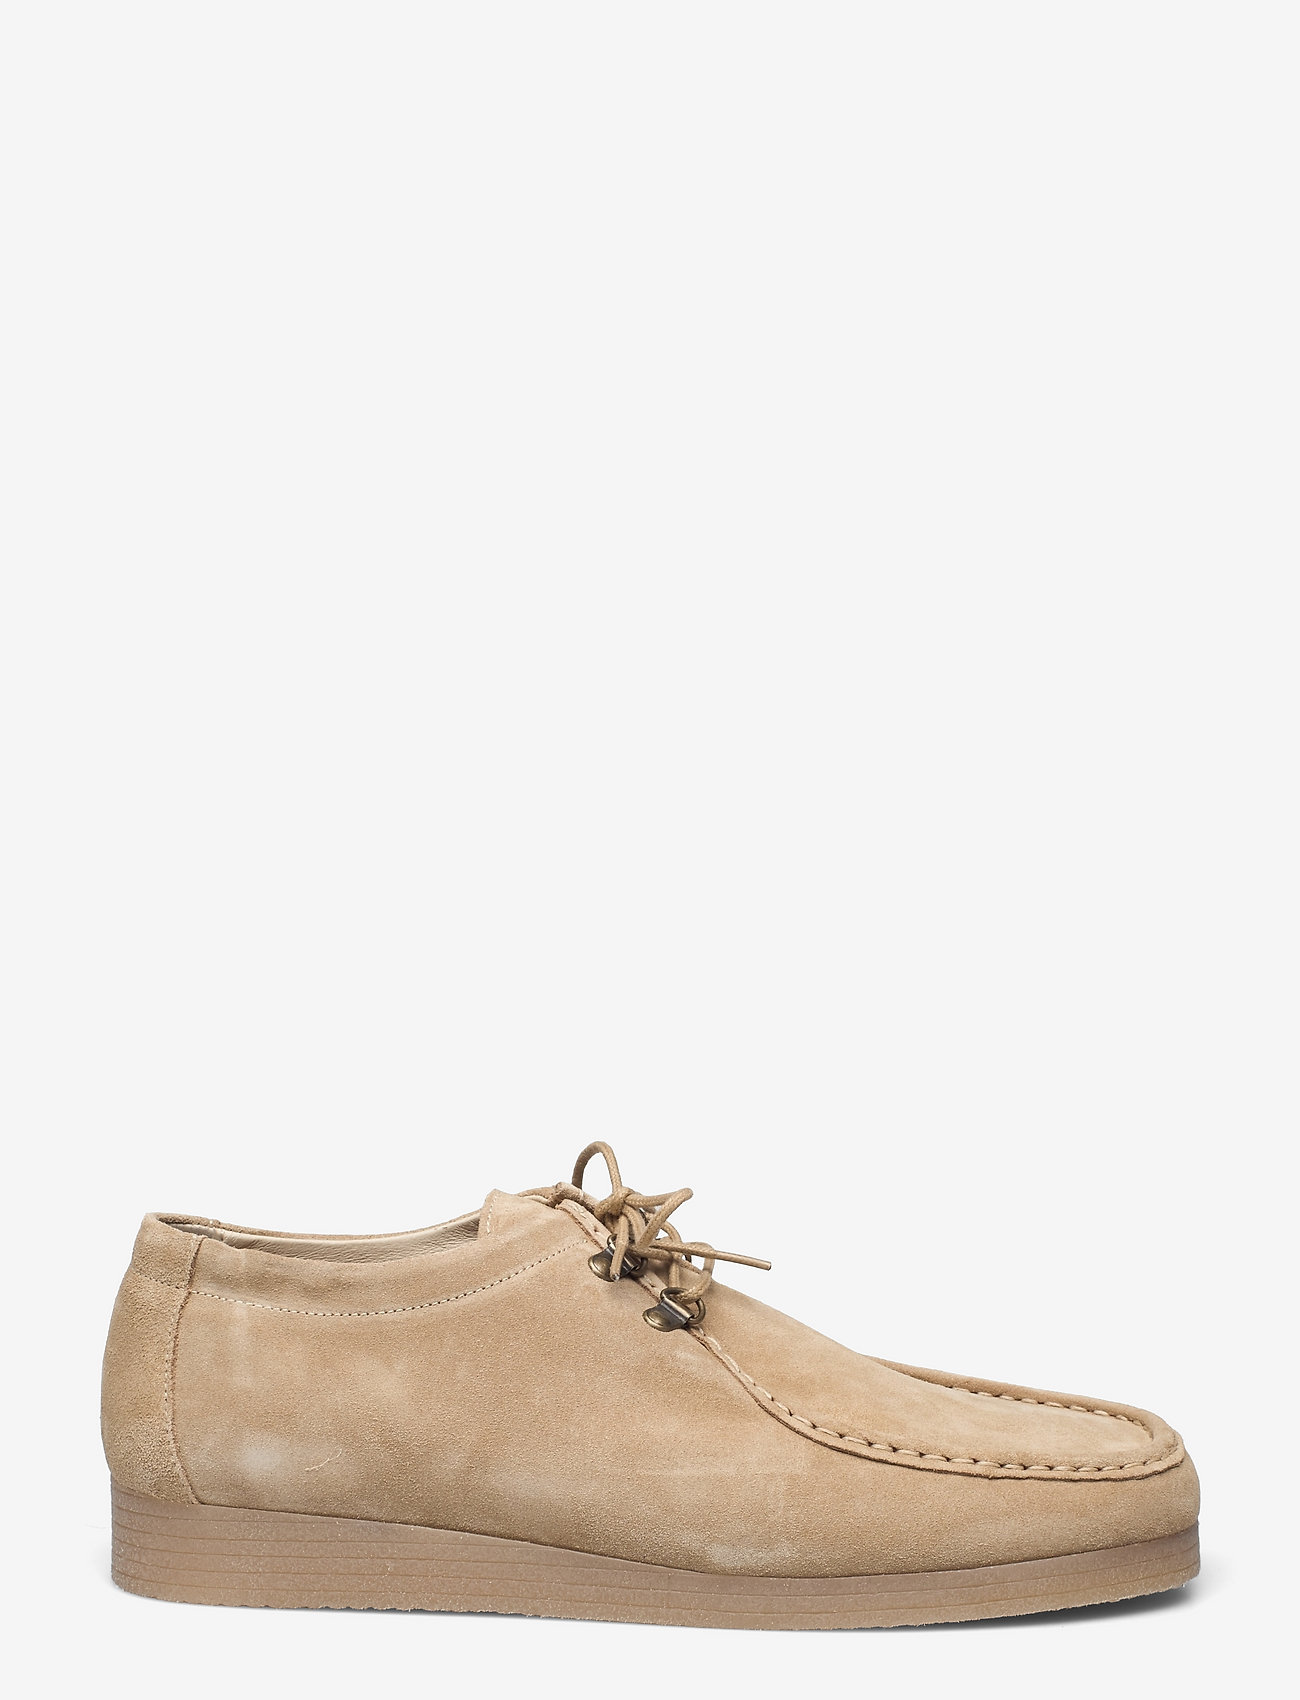 Selected Homme - SLHCHRISTOPHER SUEDEALLABEE - desert boots - sand - 1